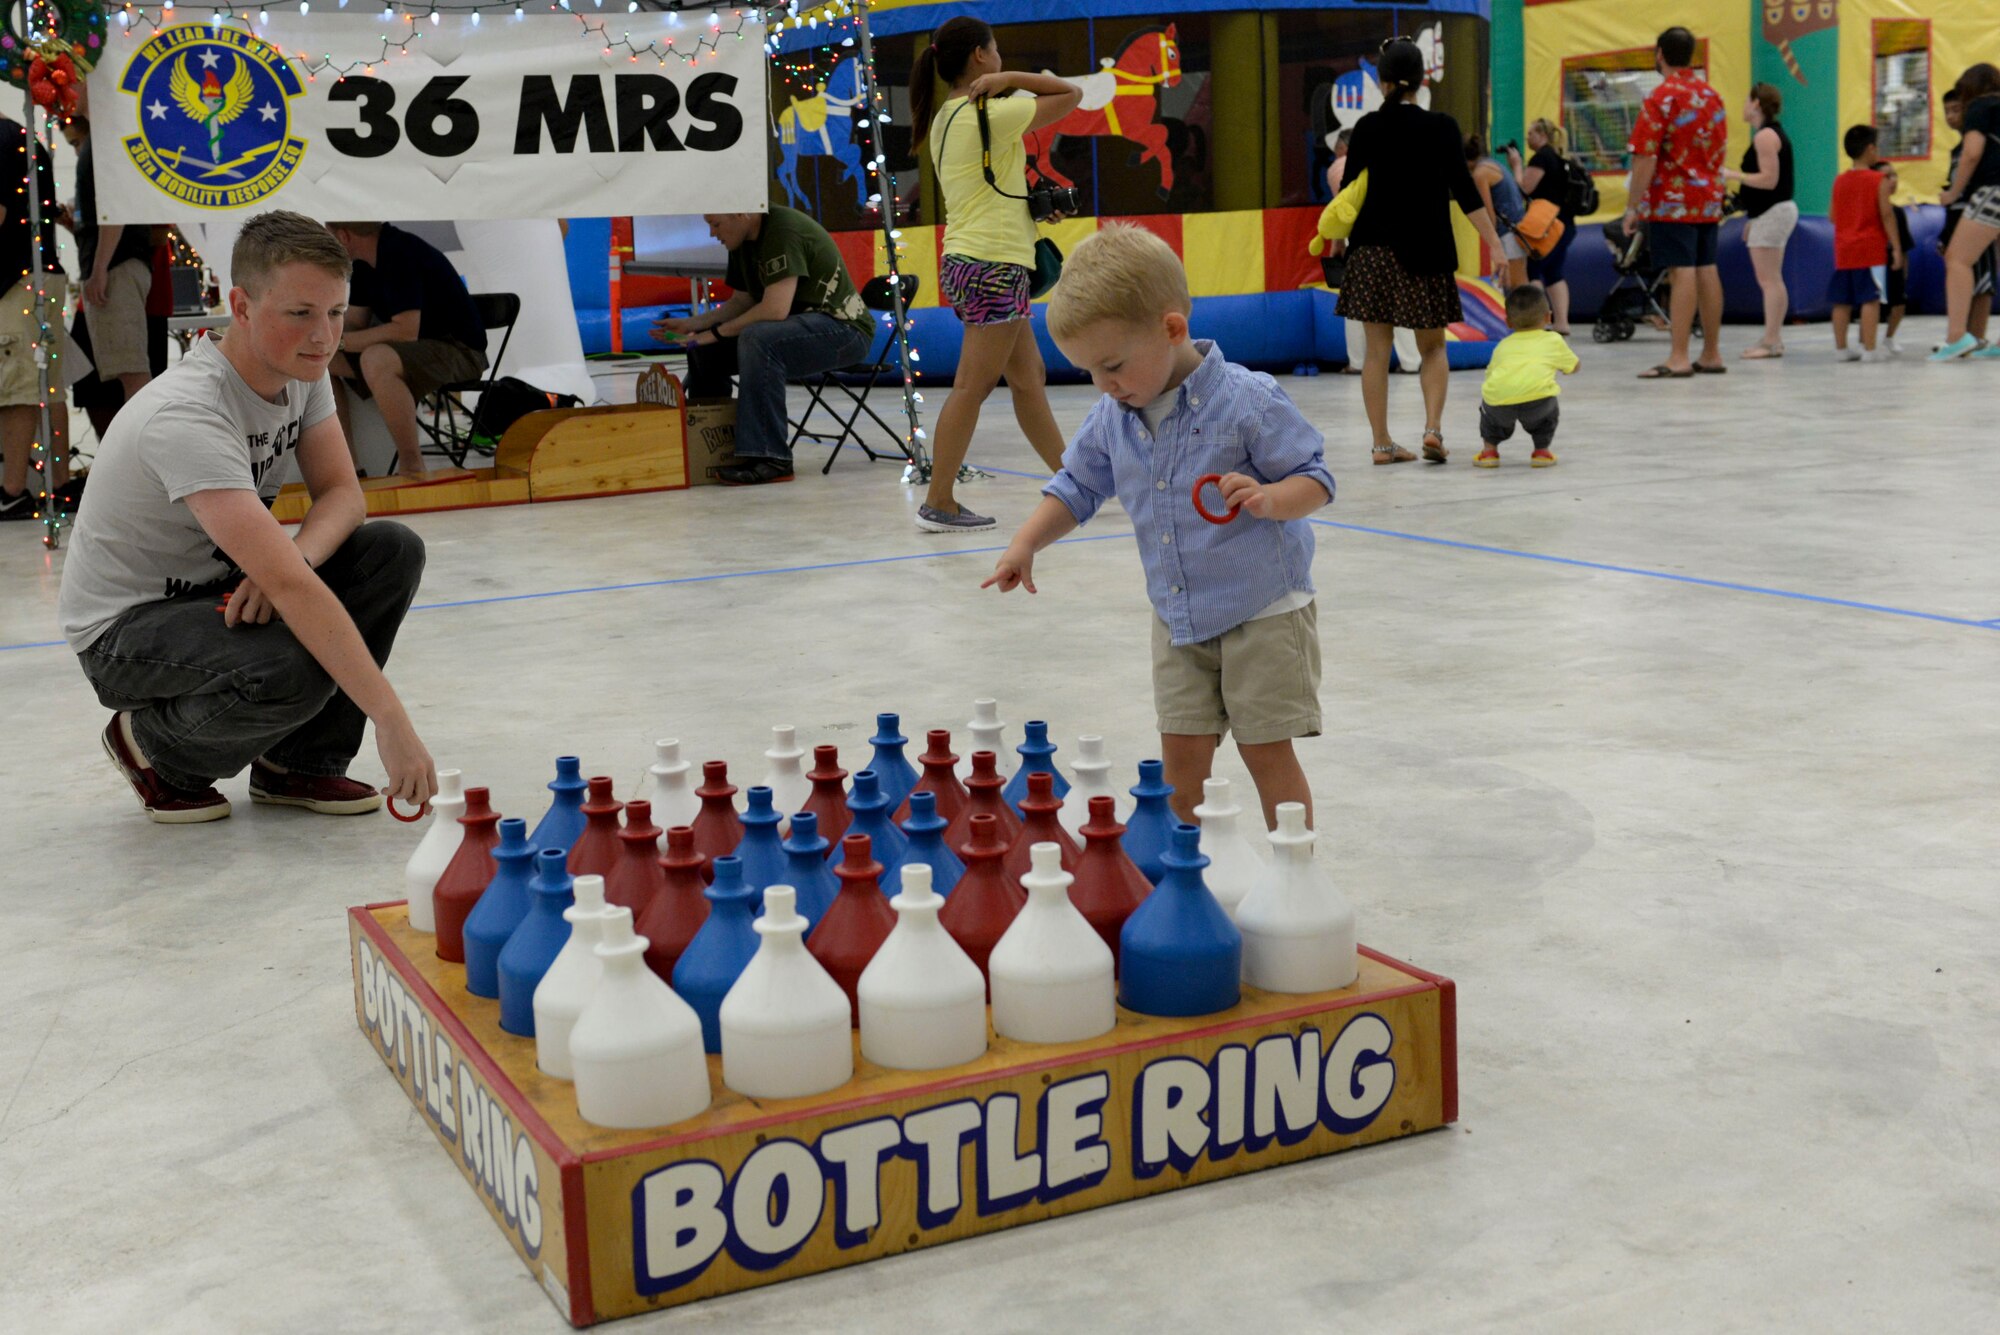 A Team Andersen family member plays bottle ring, Dec. 7, 2014, at Andersen Air Force Base, Guam.  Andersen held a holiday party that included games, a bounce house and a chance to take photos with Santa Claus.  (U.S. Air Force photo by Staff Sgt. Robert Hicks/Released)